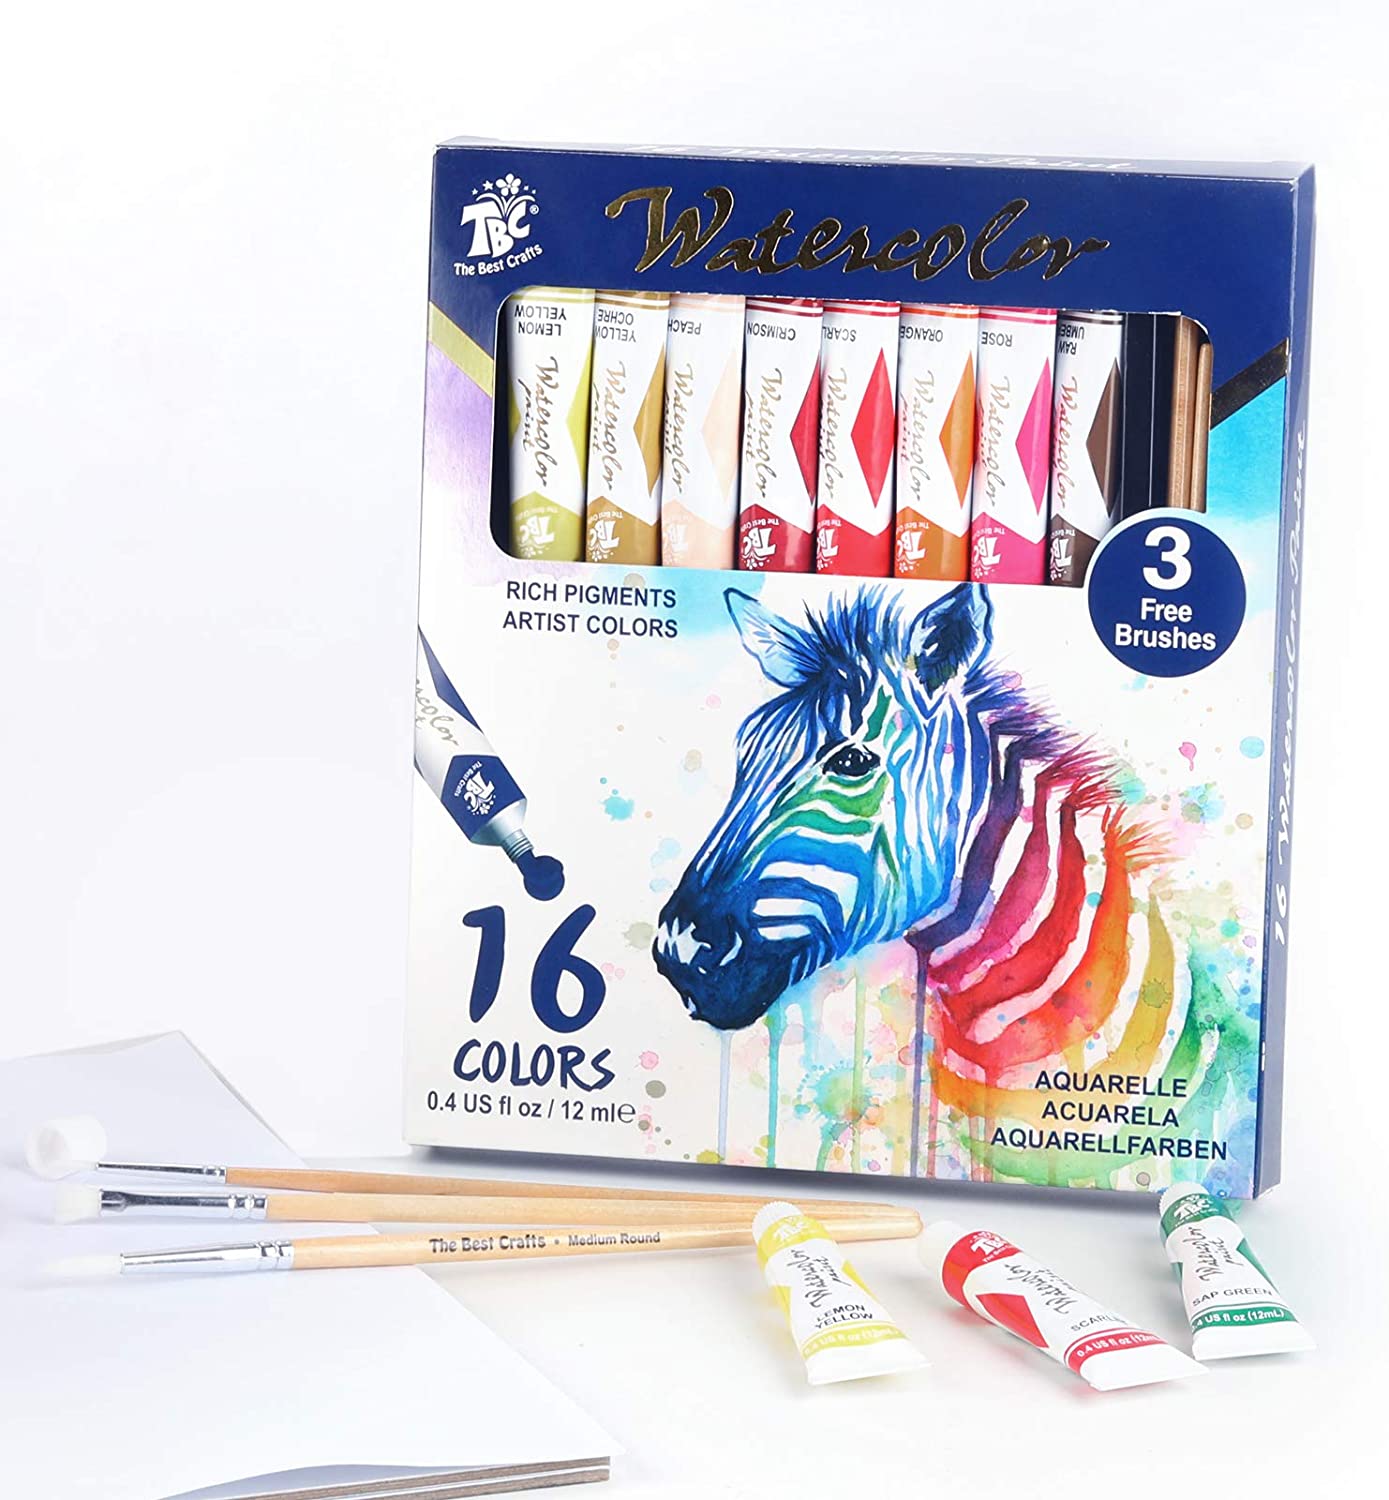 Refillable Watercolor Brush Pens - Set of 24 With Case – ColorIt